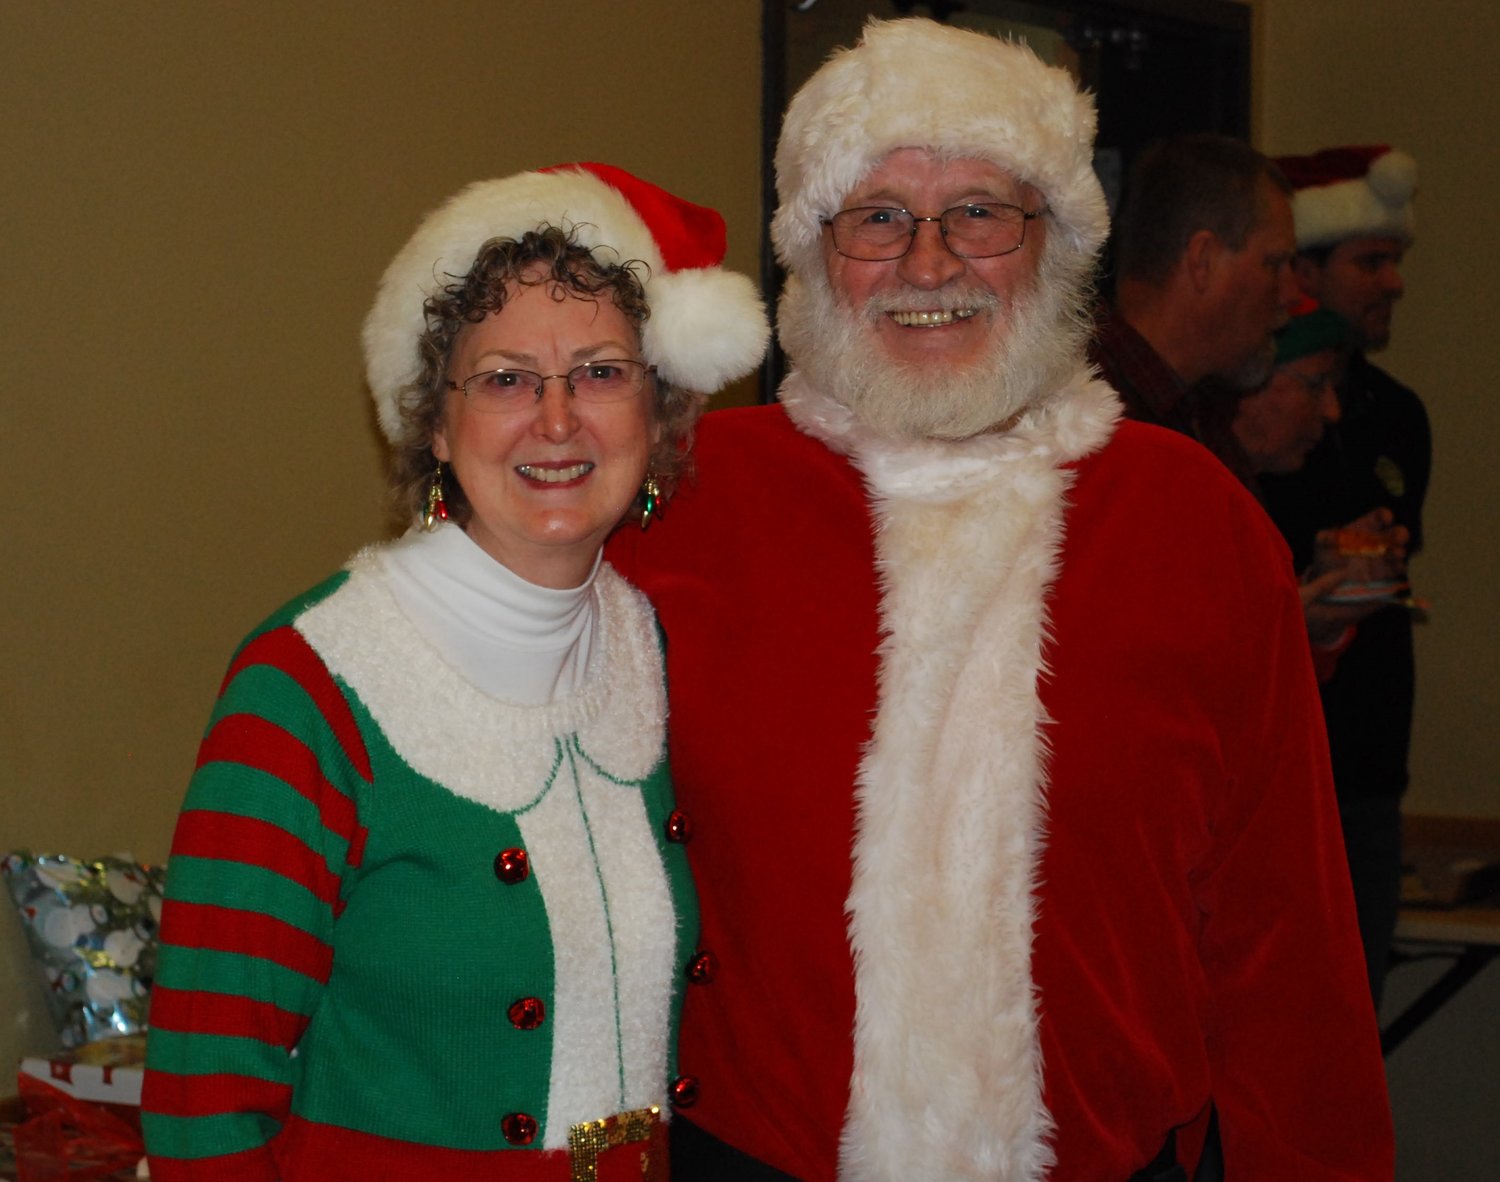 Nancy Heidrick and John Idsinga dress up in costume for the annual Lewis River and Battle Ground Rotary Children’s Christmas Party on Sunday, Dec. 8.